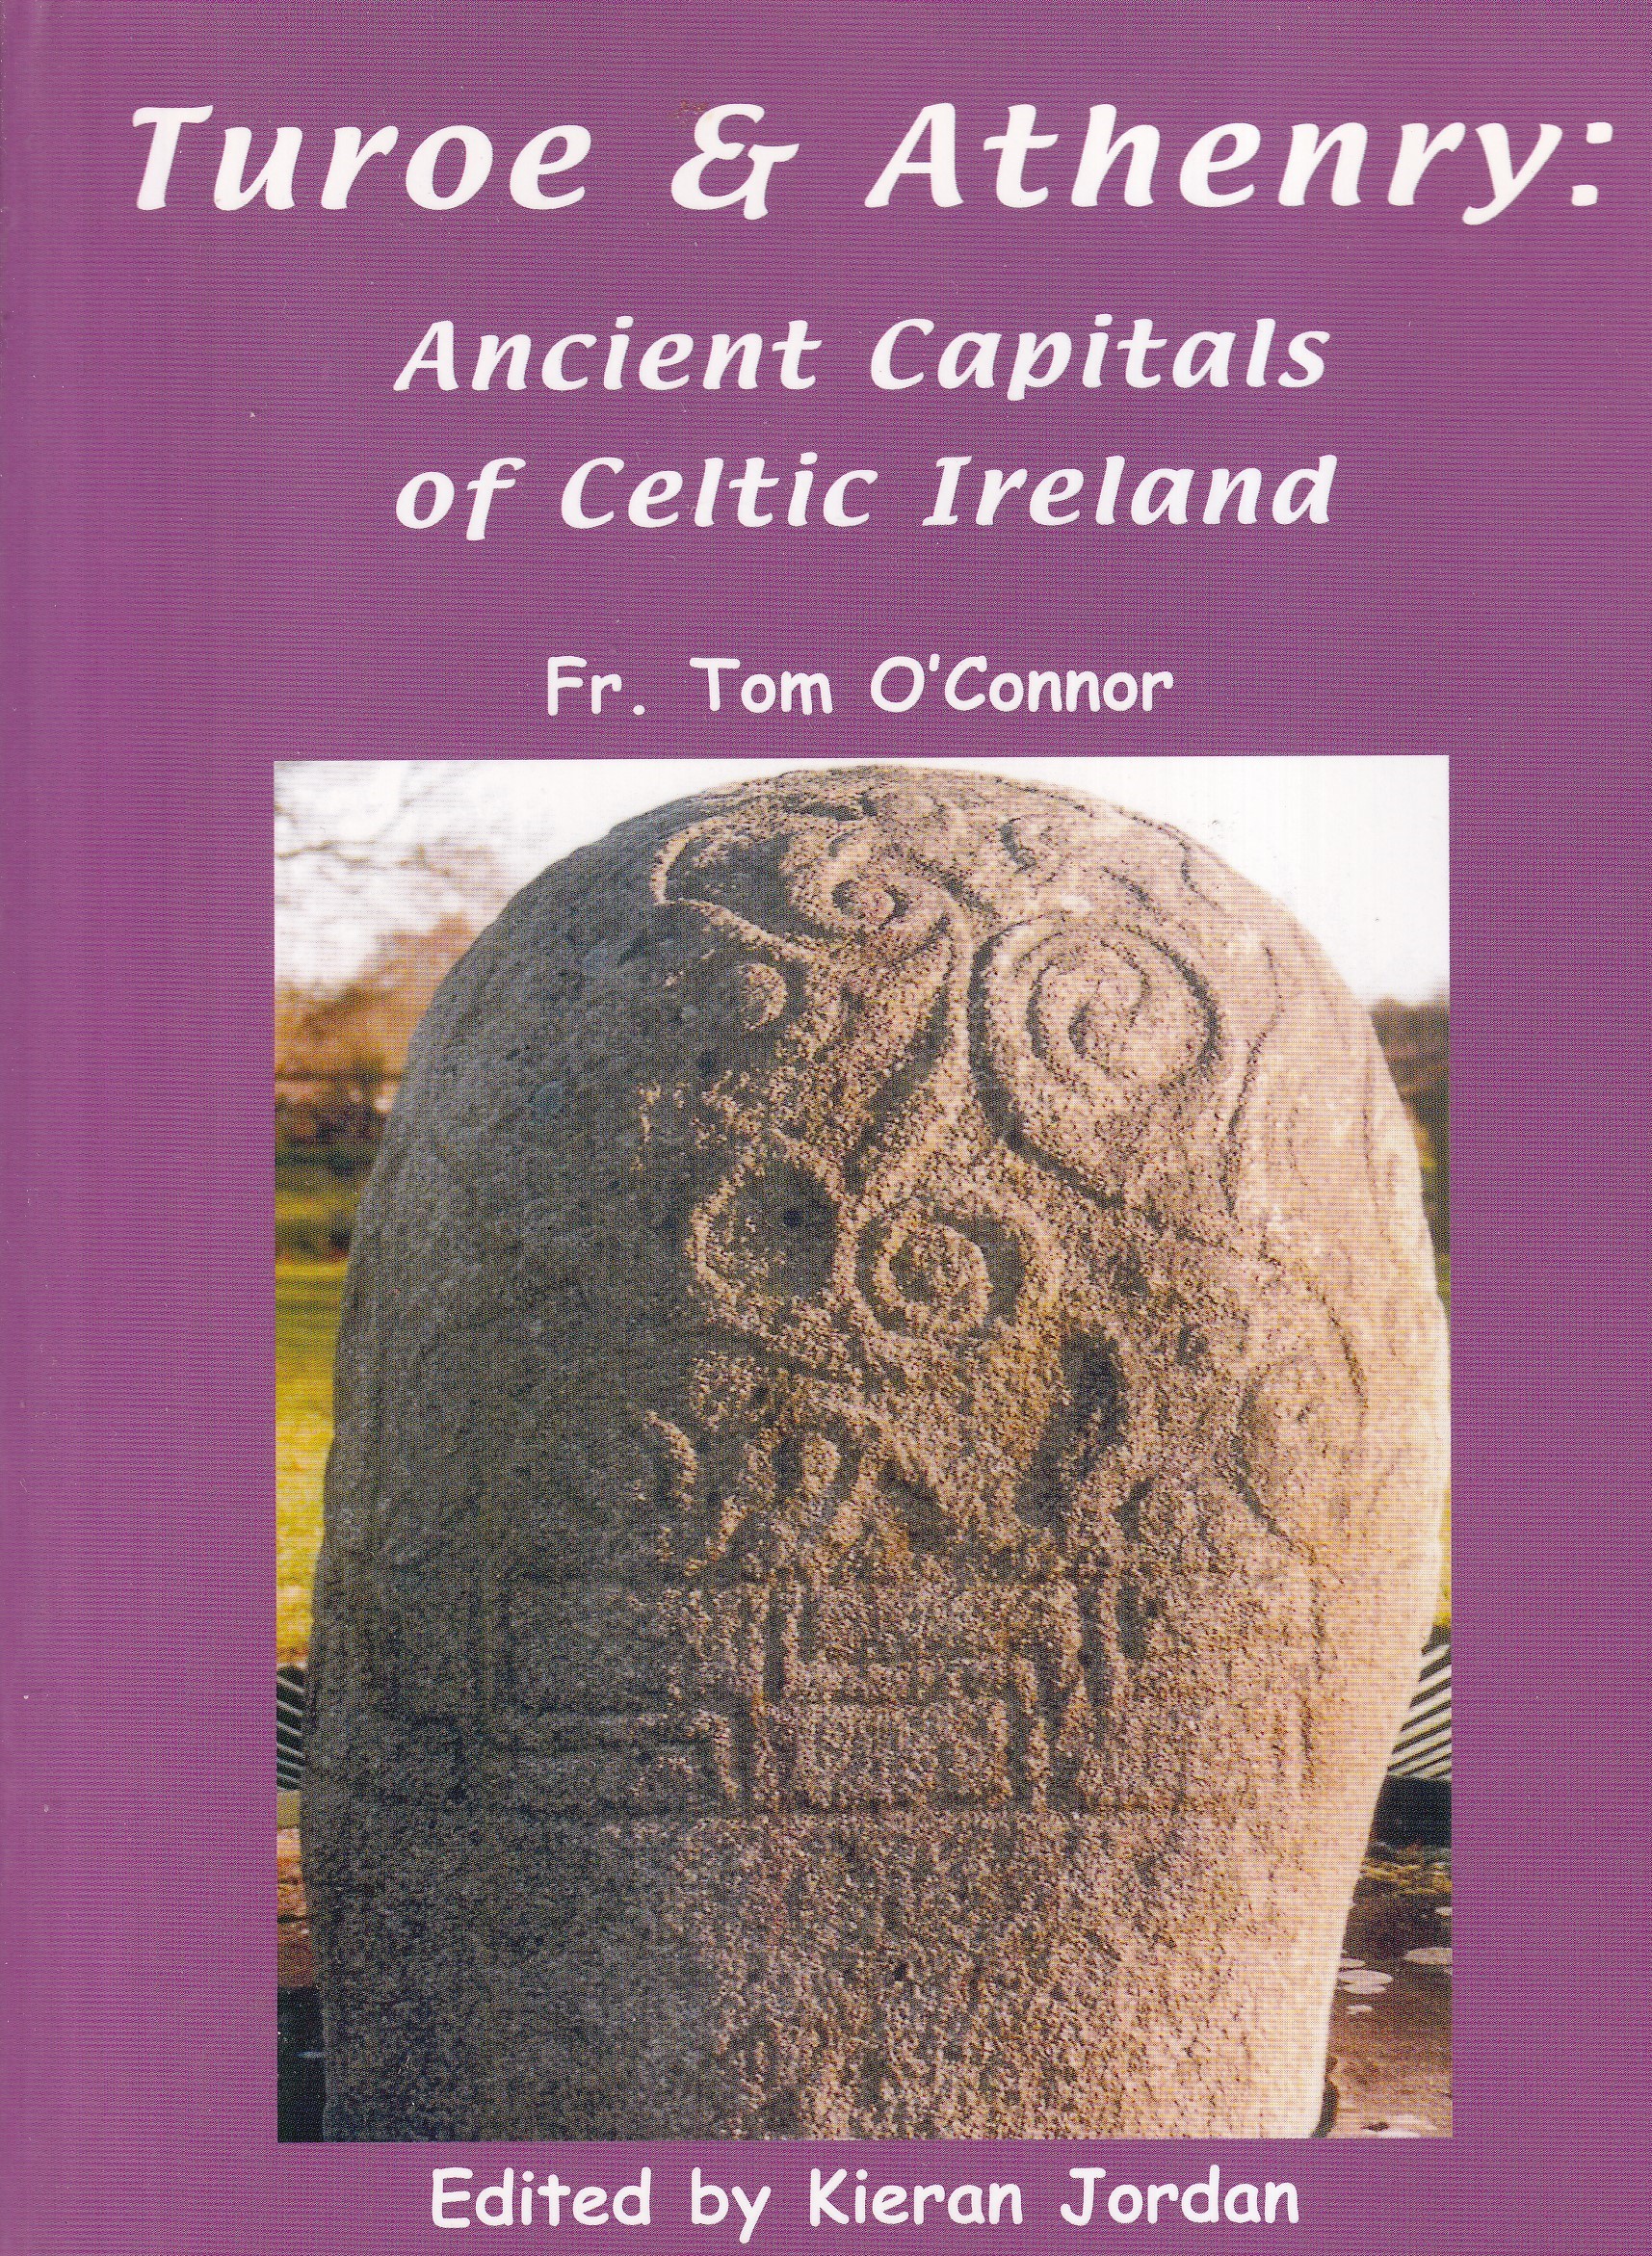 Turoe and Athenry: Ancient Capitals of Celtic Ireland by Fr. Tom O'Connor